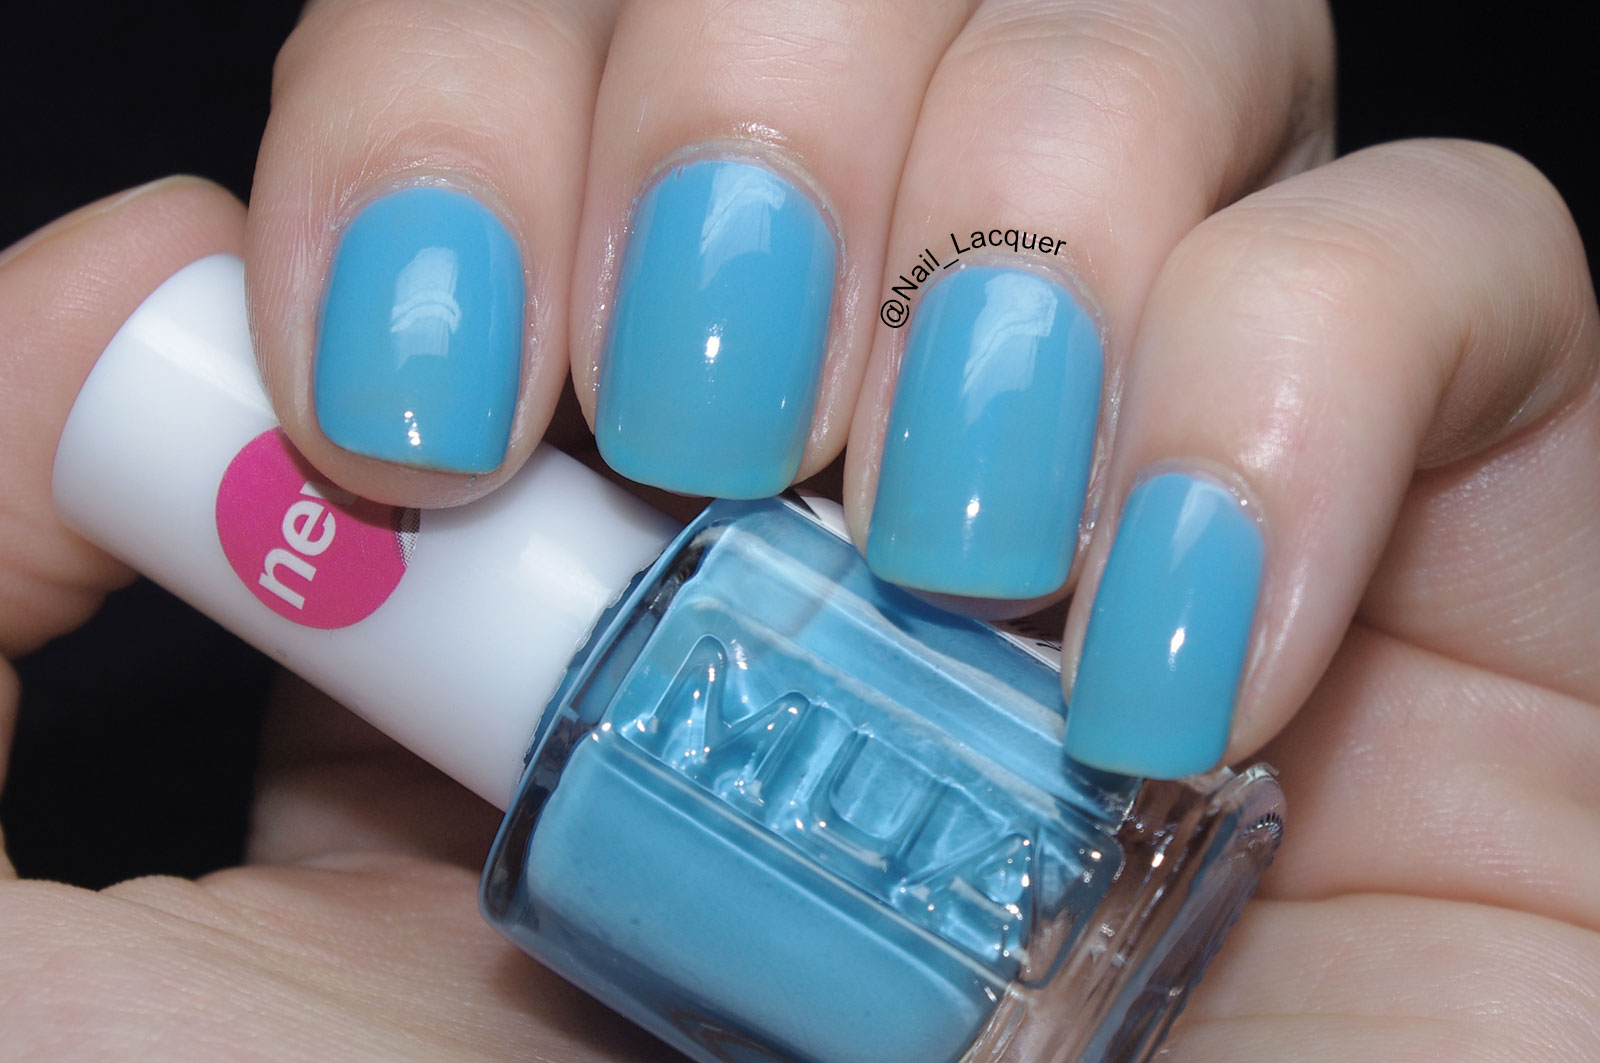 5. "Sapphire Blue" nail polish for a bold and elegant anniversary outfit - wide 5